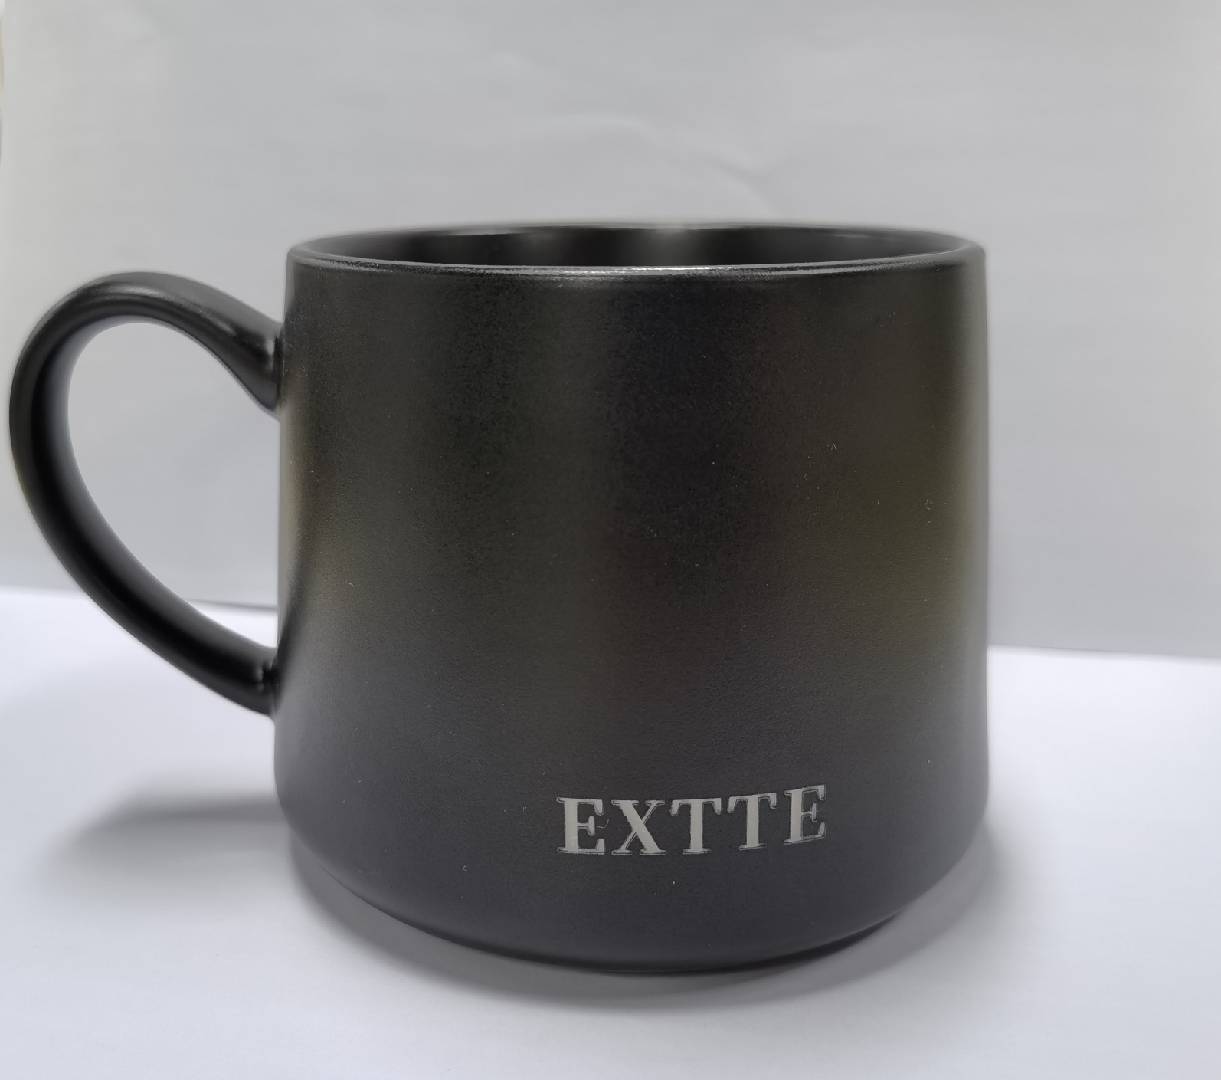 EXTTE Ceramic Cup,Smooth Frosted Porcelain Mug, Coffee Mugs, Tea Cup, for Office and Home, Black